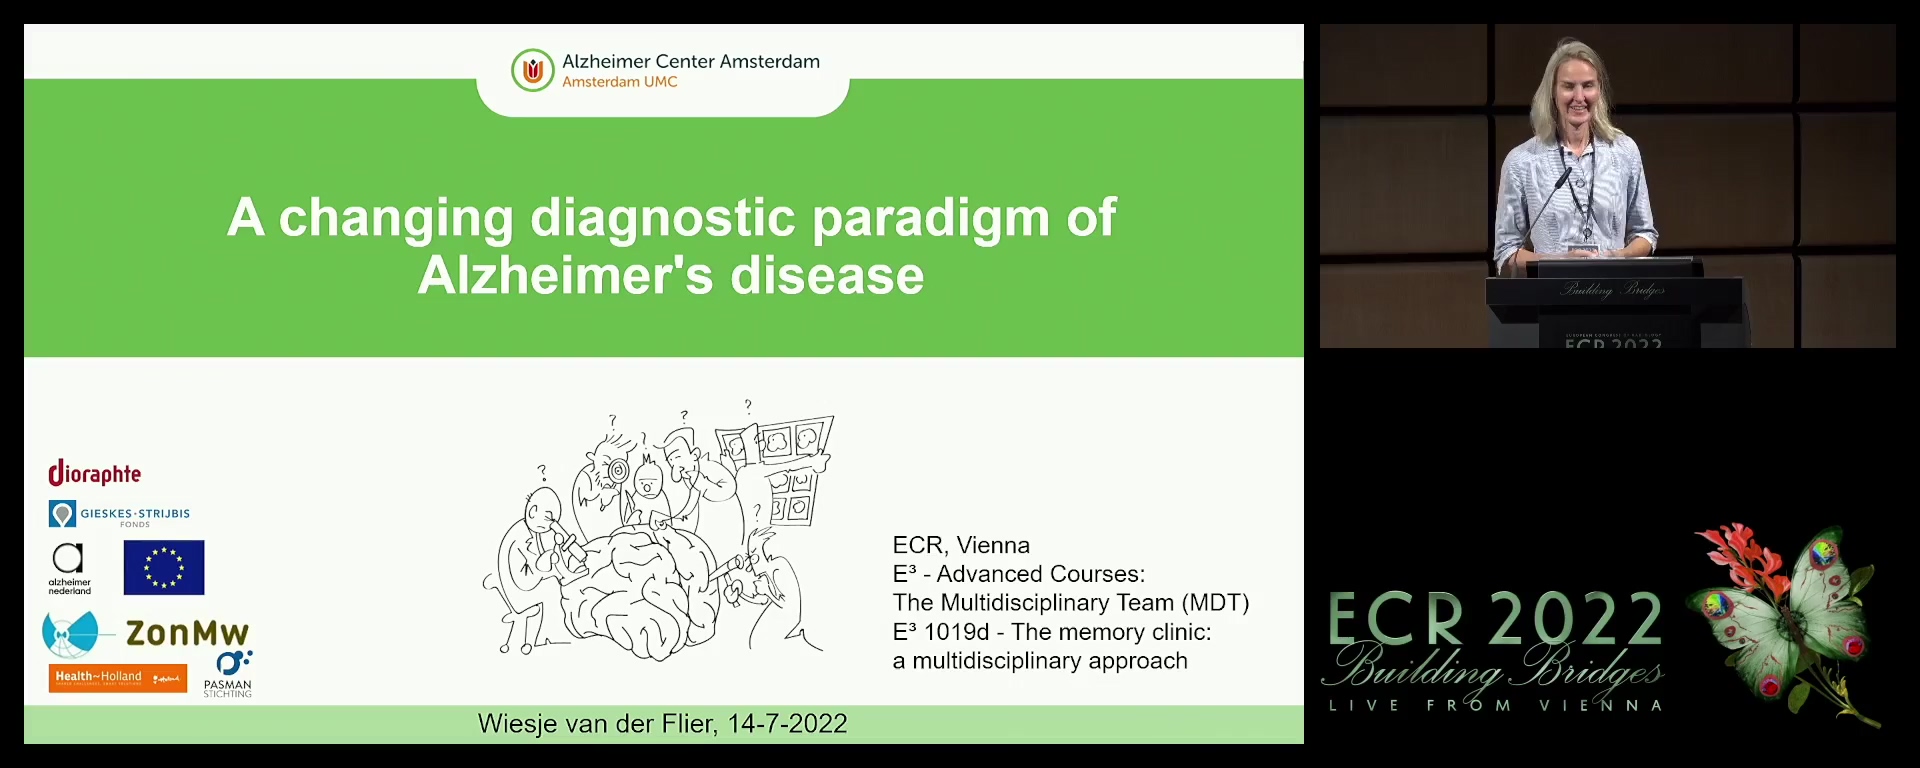 A changing diagnostic paradigm of Alzheimer's disease